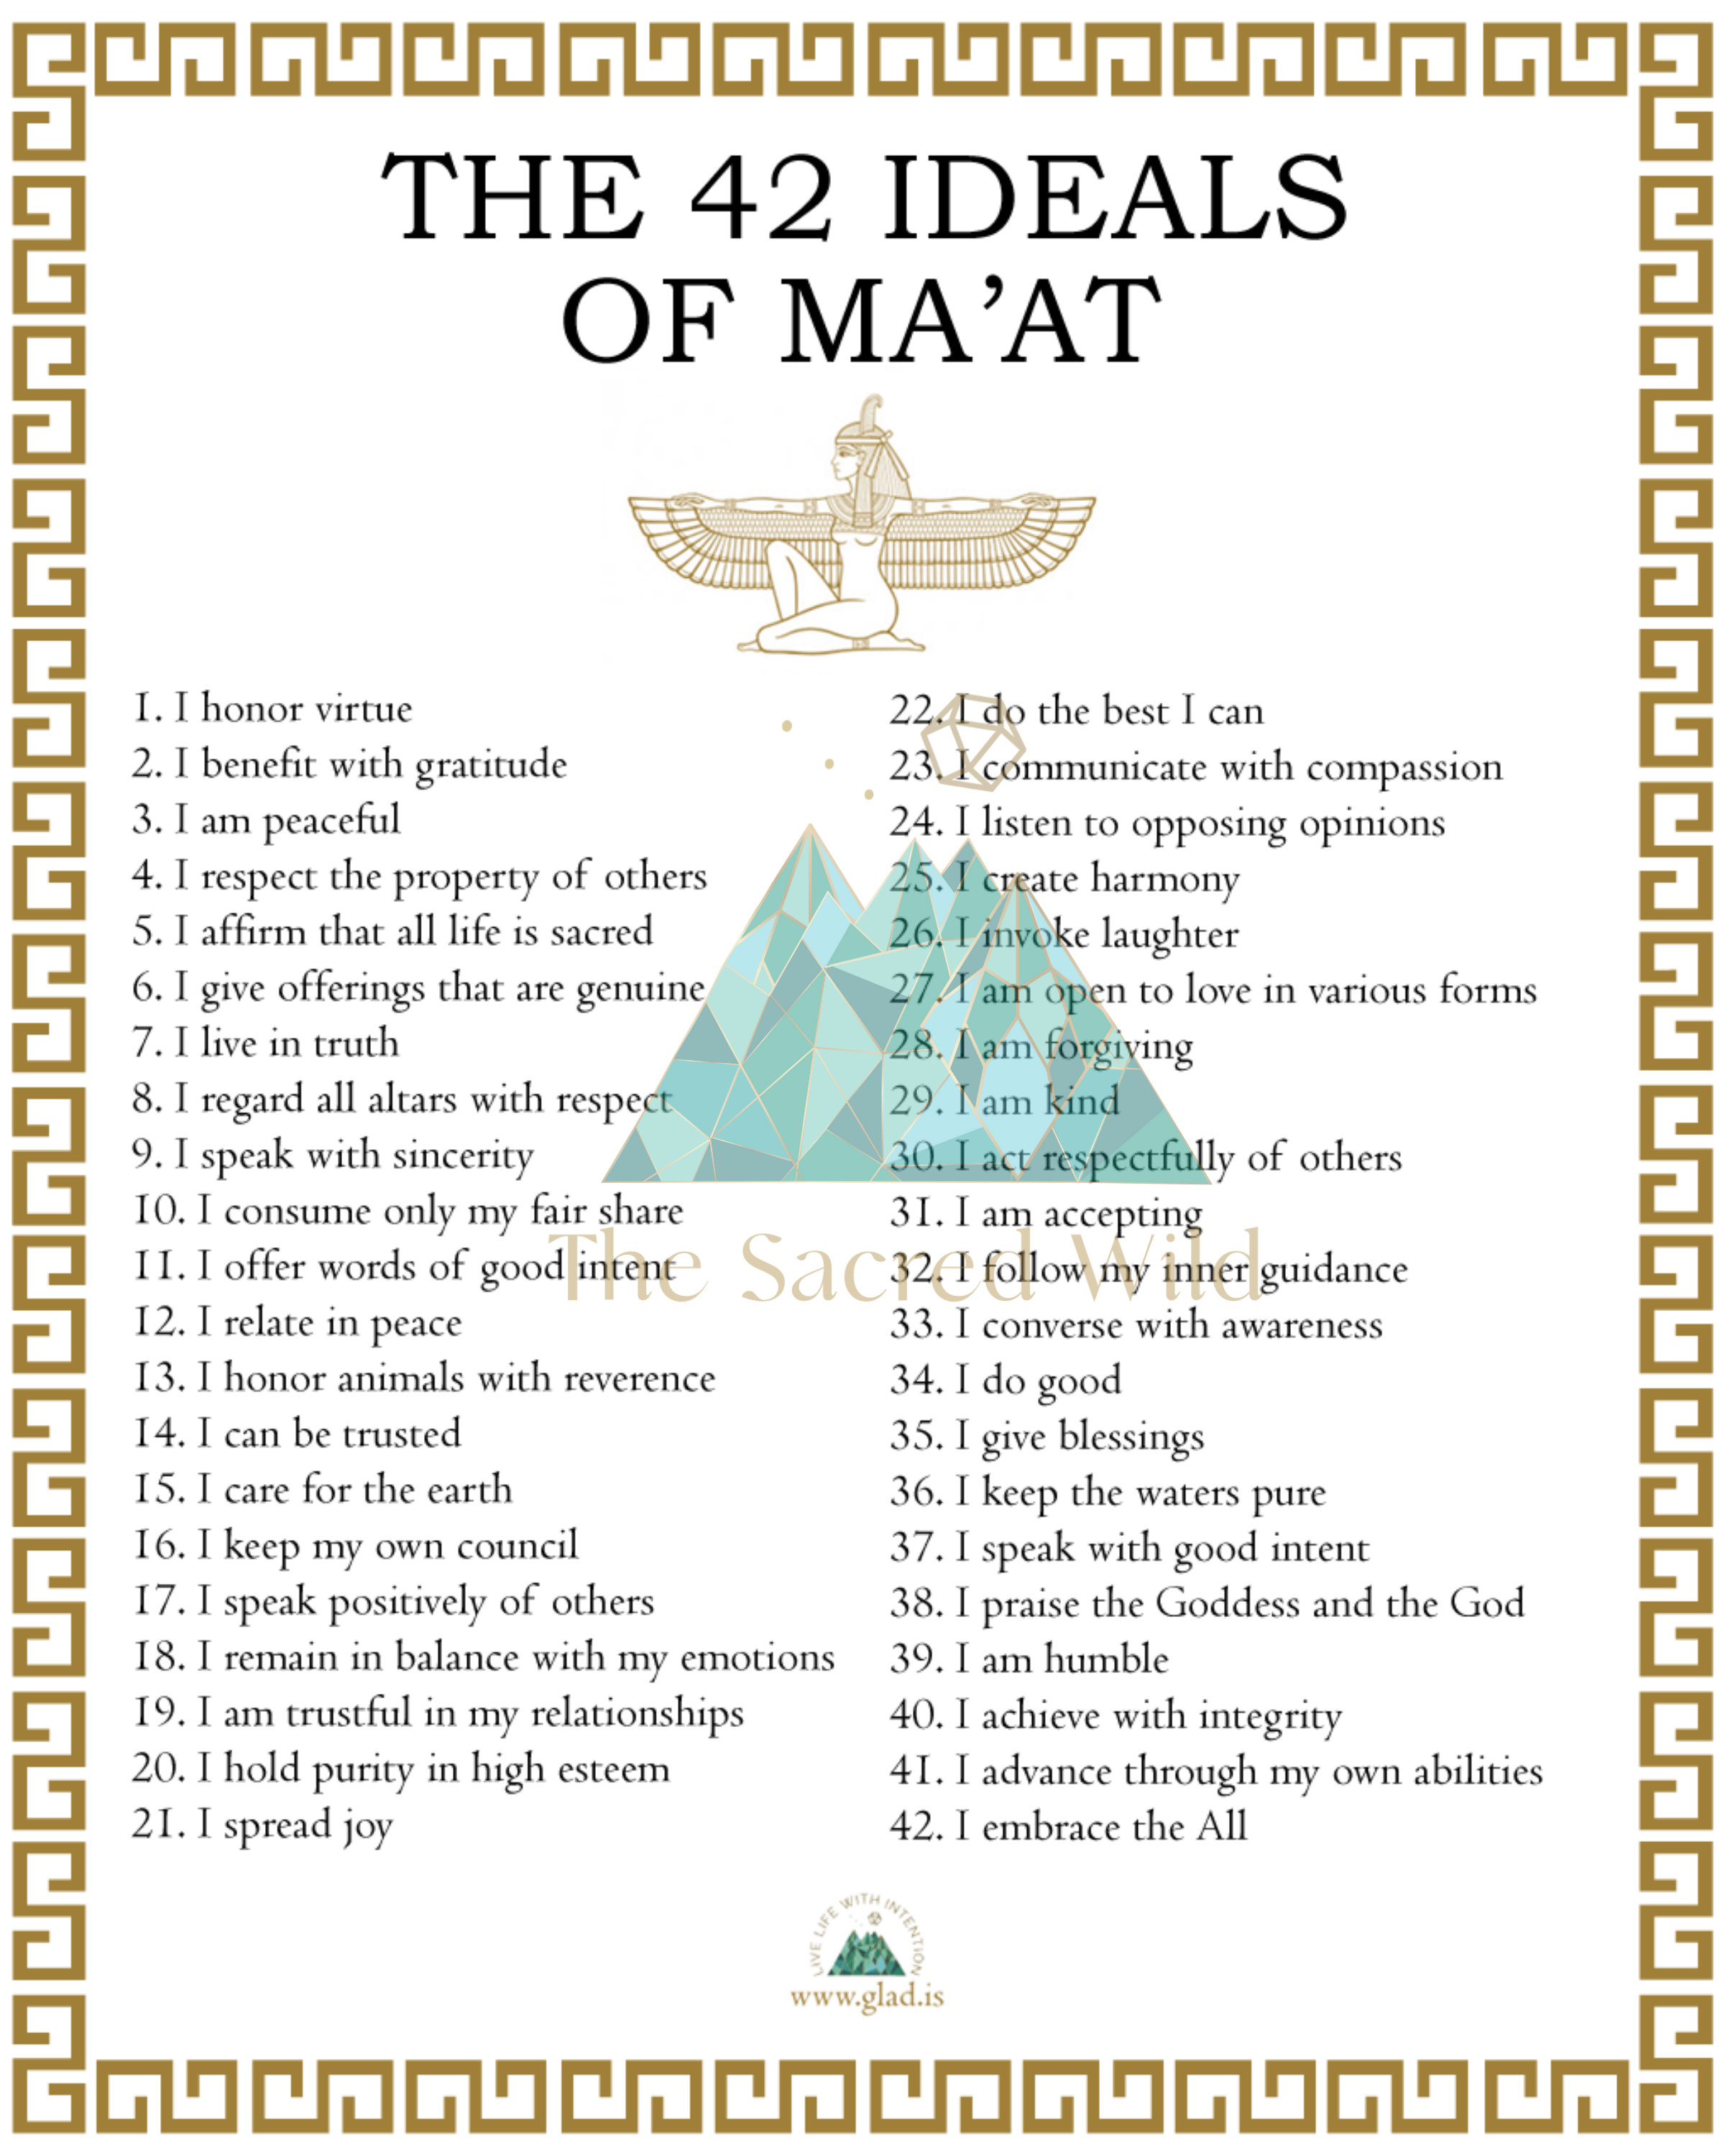 bord camera duisternis The 42 Ideals of Ma'at Poster - Digital Download – Glad.is